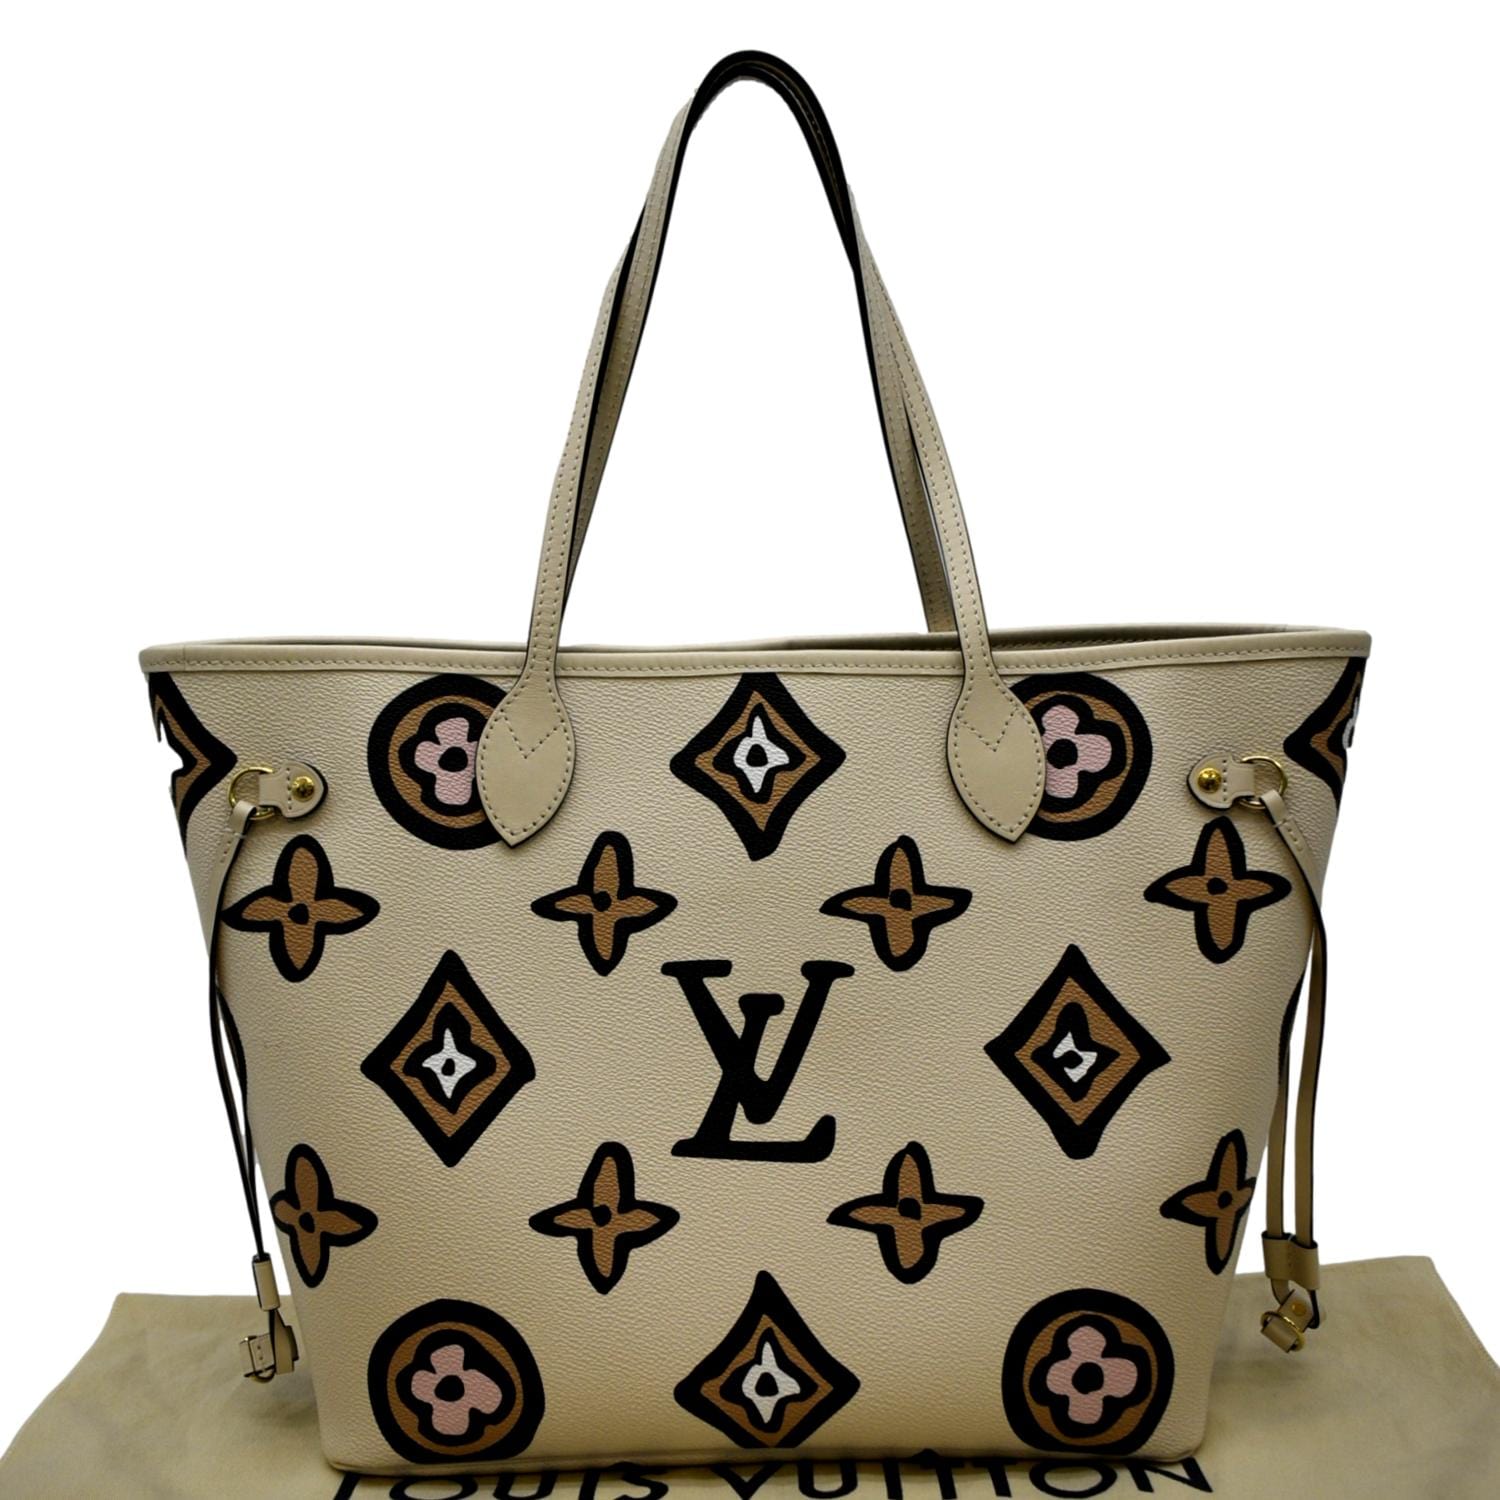 LOUIS VUITTON Recommended Bags other than Neverfull